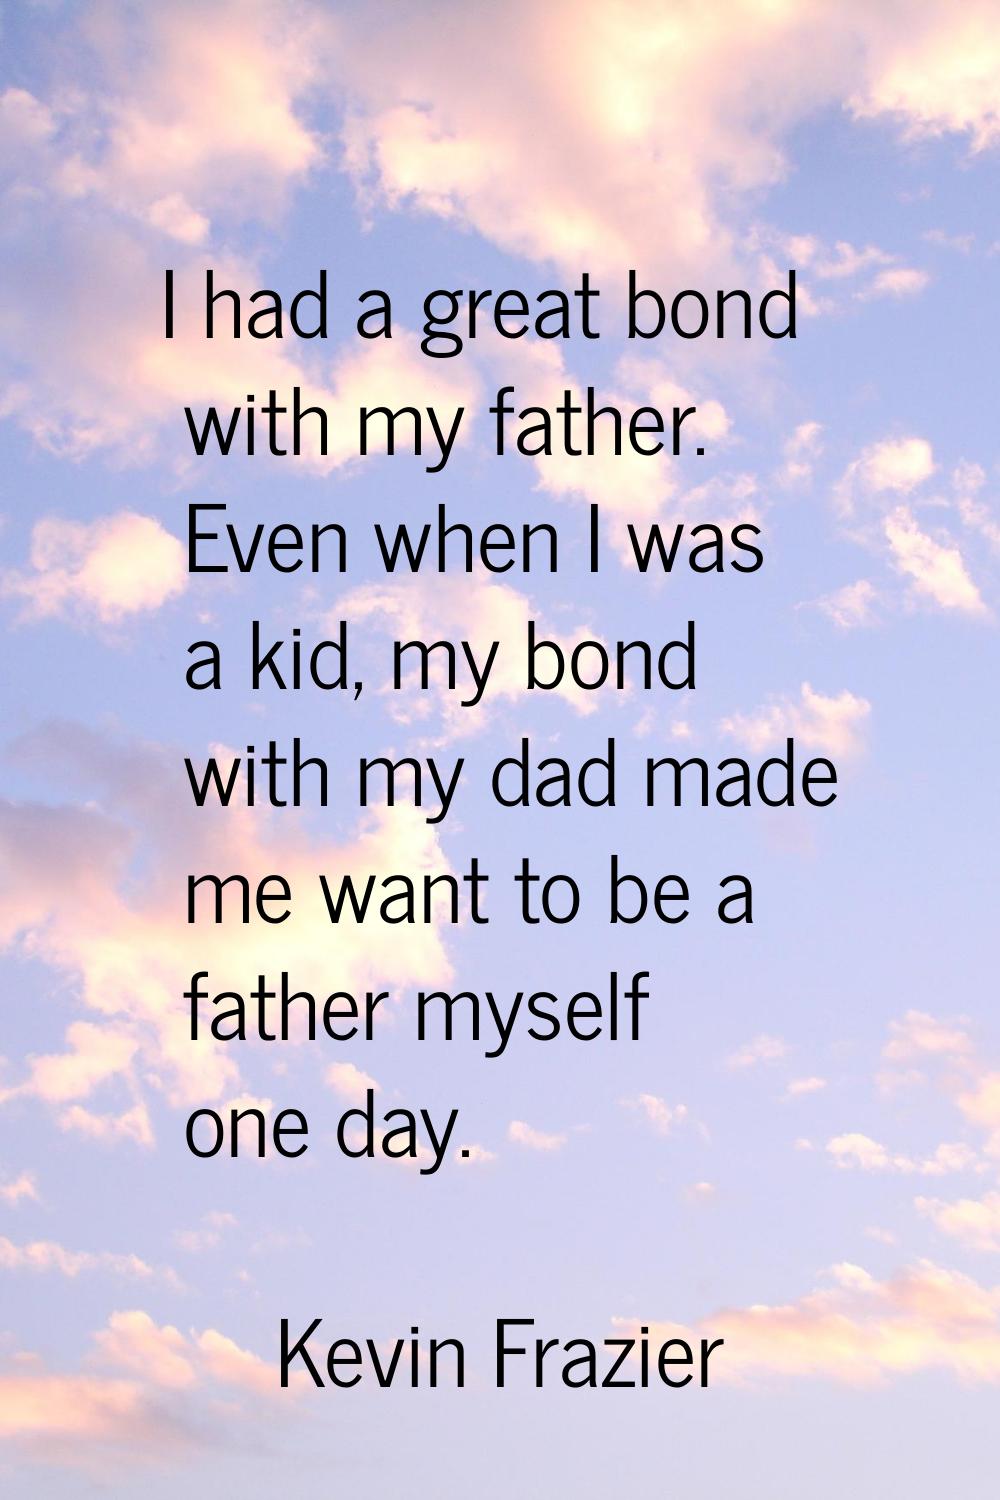 I had a great bond with my father. Even when I was a kid, my bond with my dad made me want to be a 